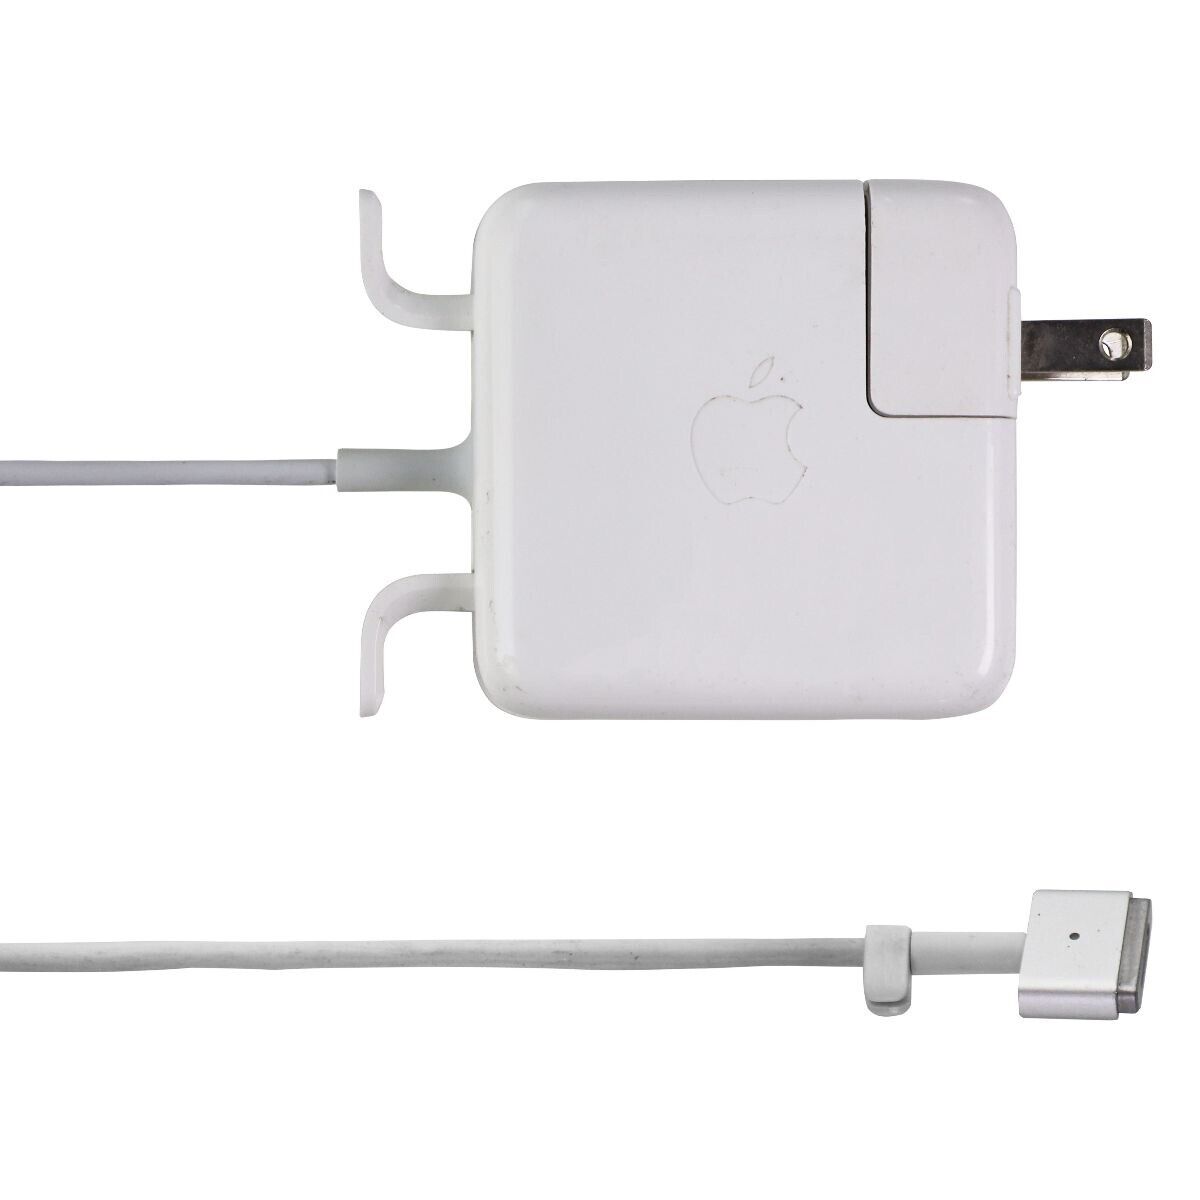 FAIR Apple (45W) MagSafe 2 Power Adapter with Folding Wall Plug - White (A1436)